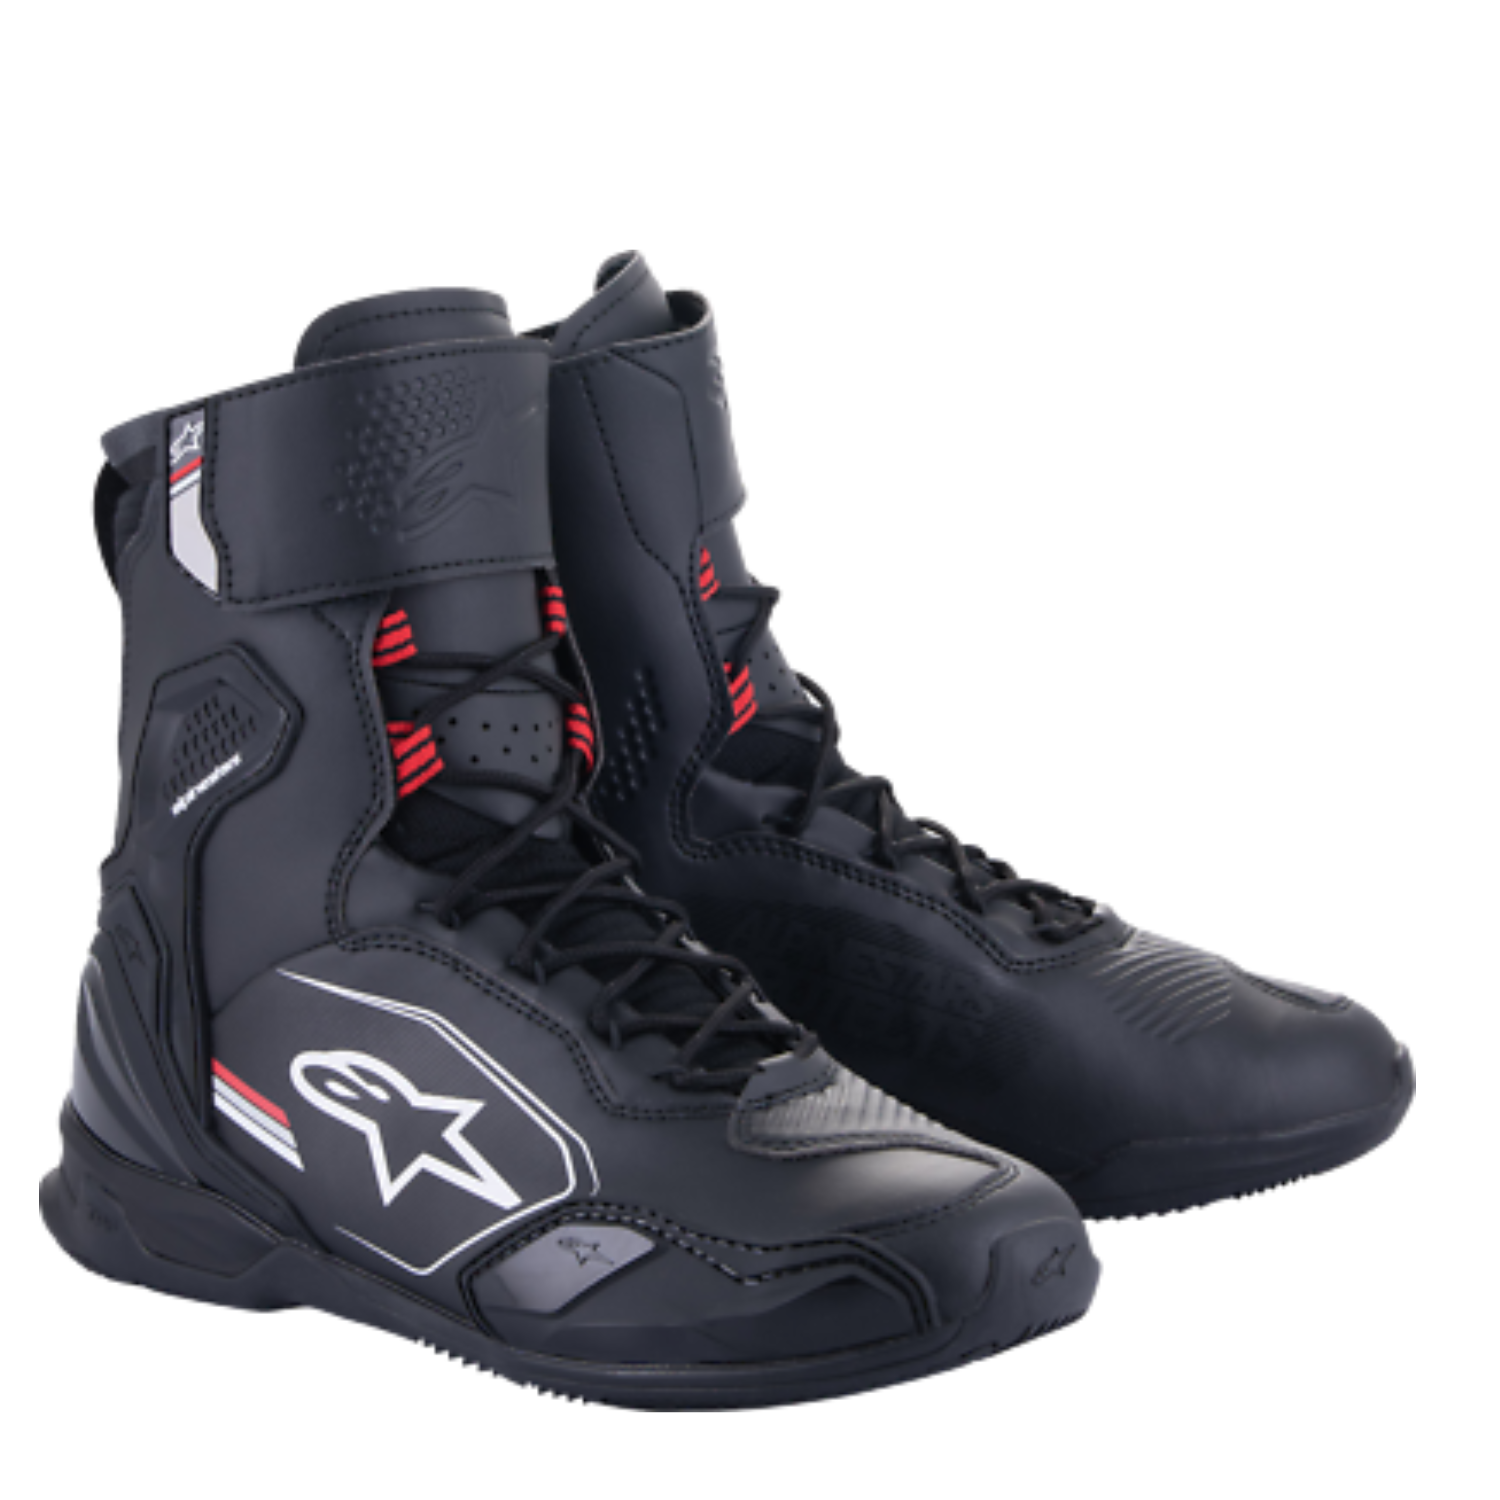 Image of Alpinestars Superfaster Shoes Black Gray Bright Red Size US 105 EN